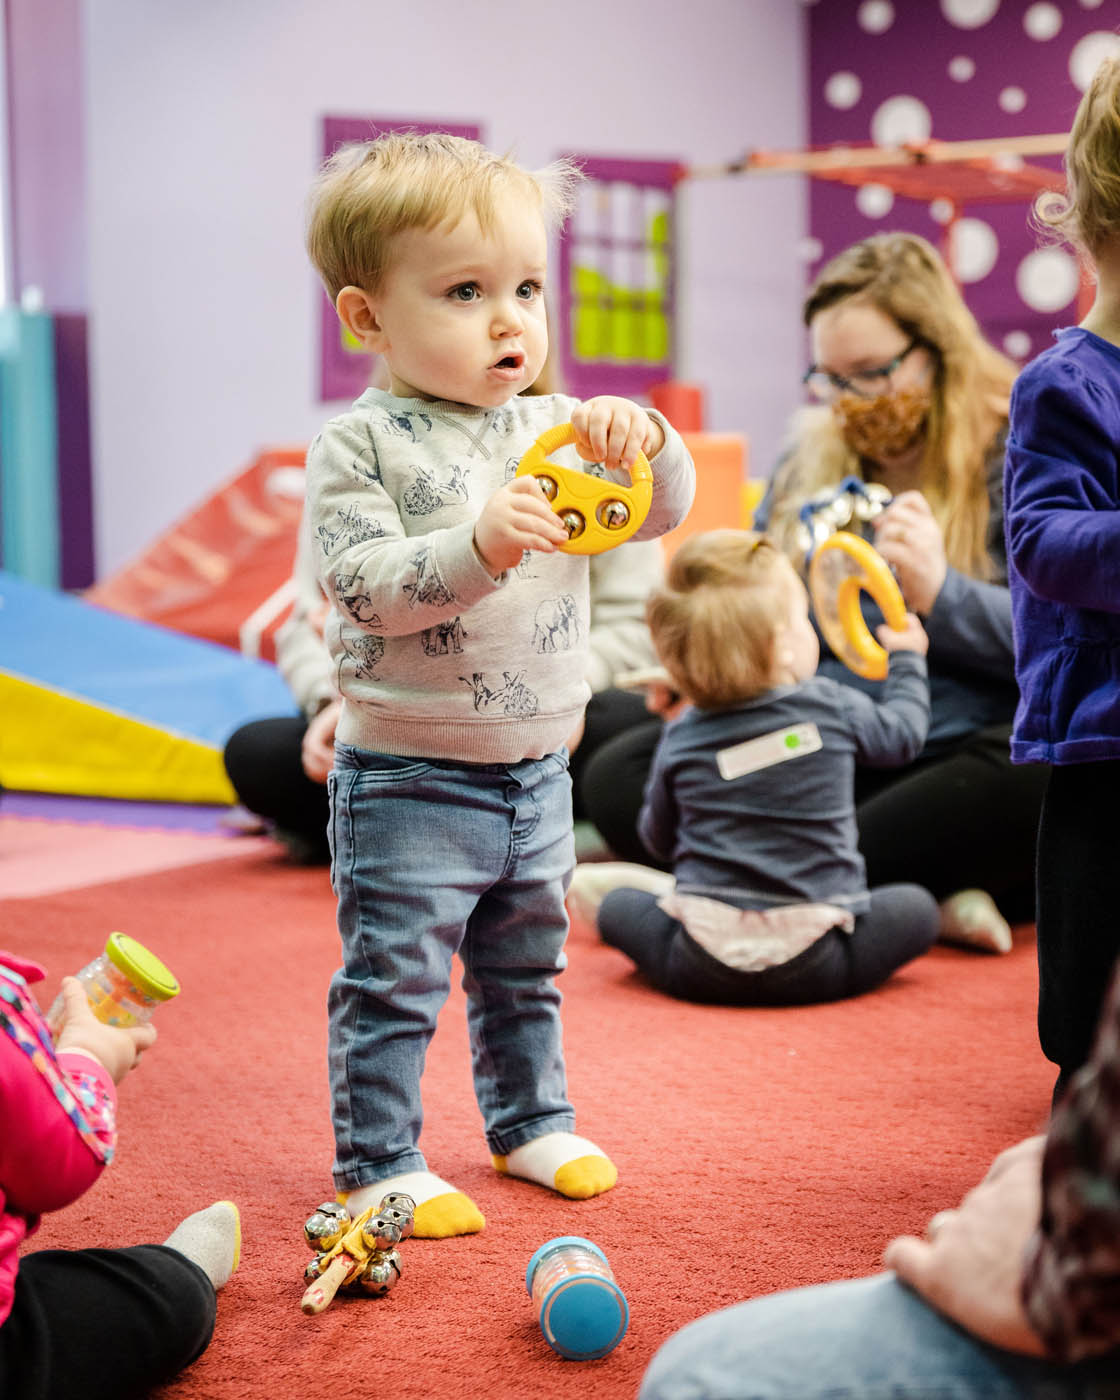 A young boy holding a musical instrument at a toddler music class.